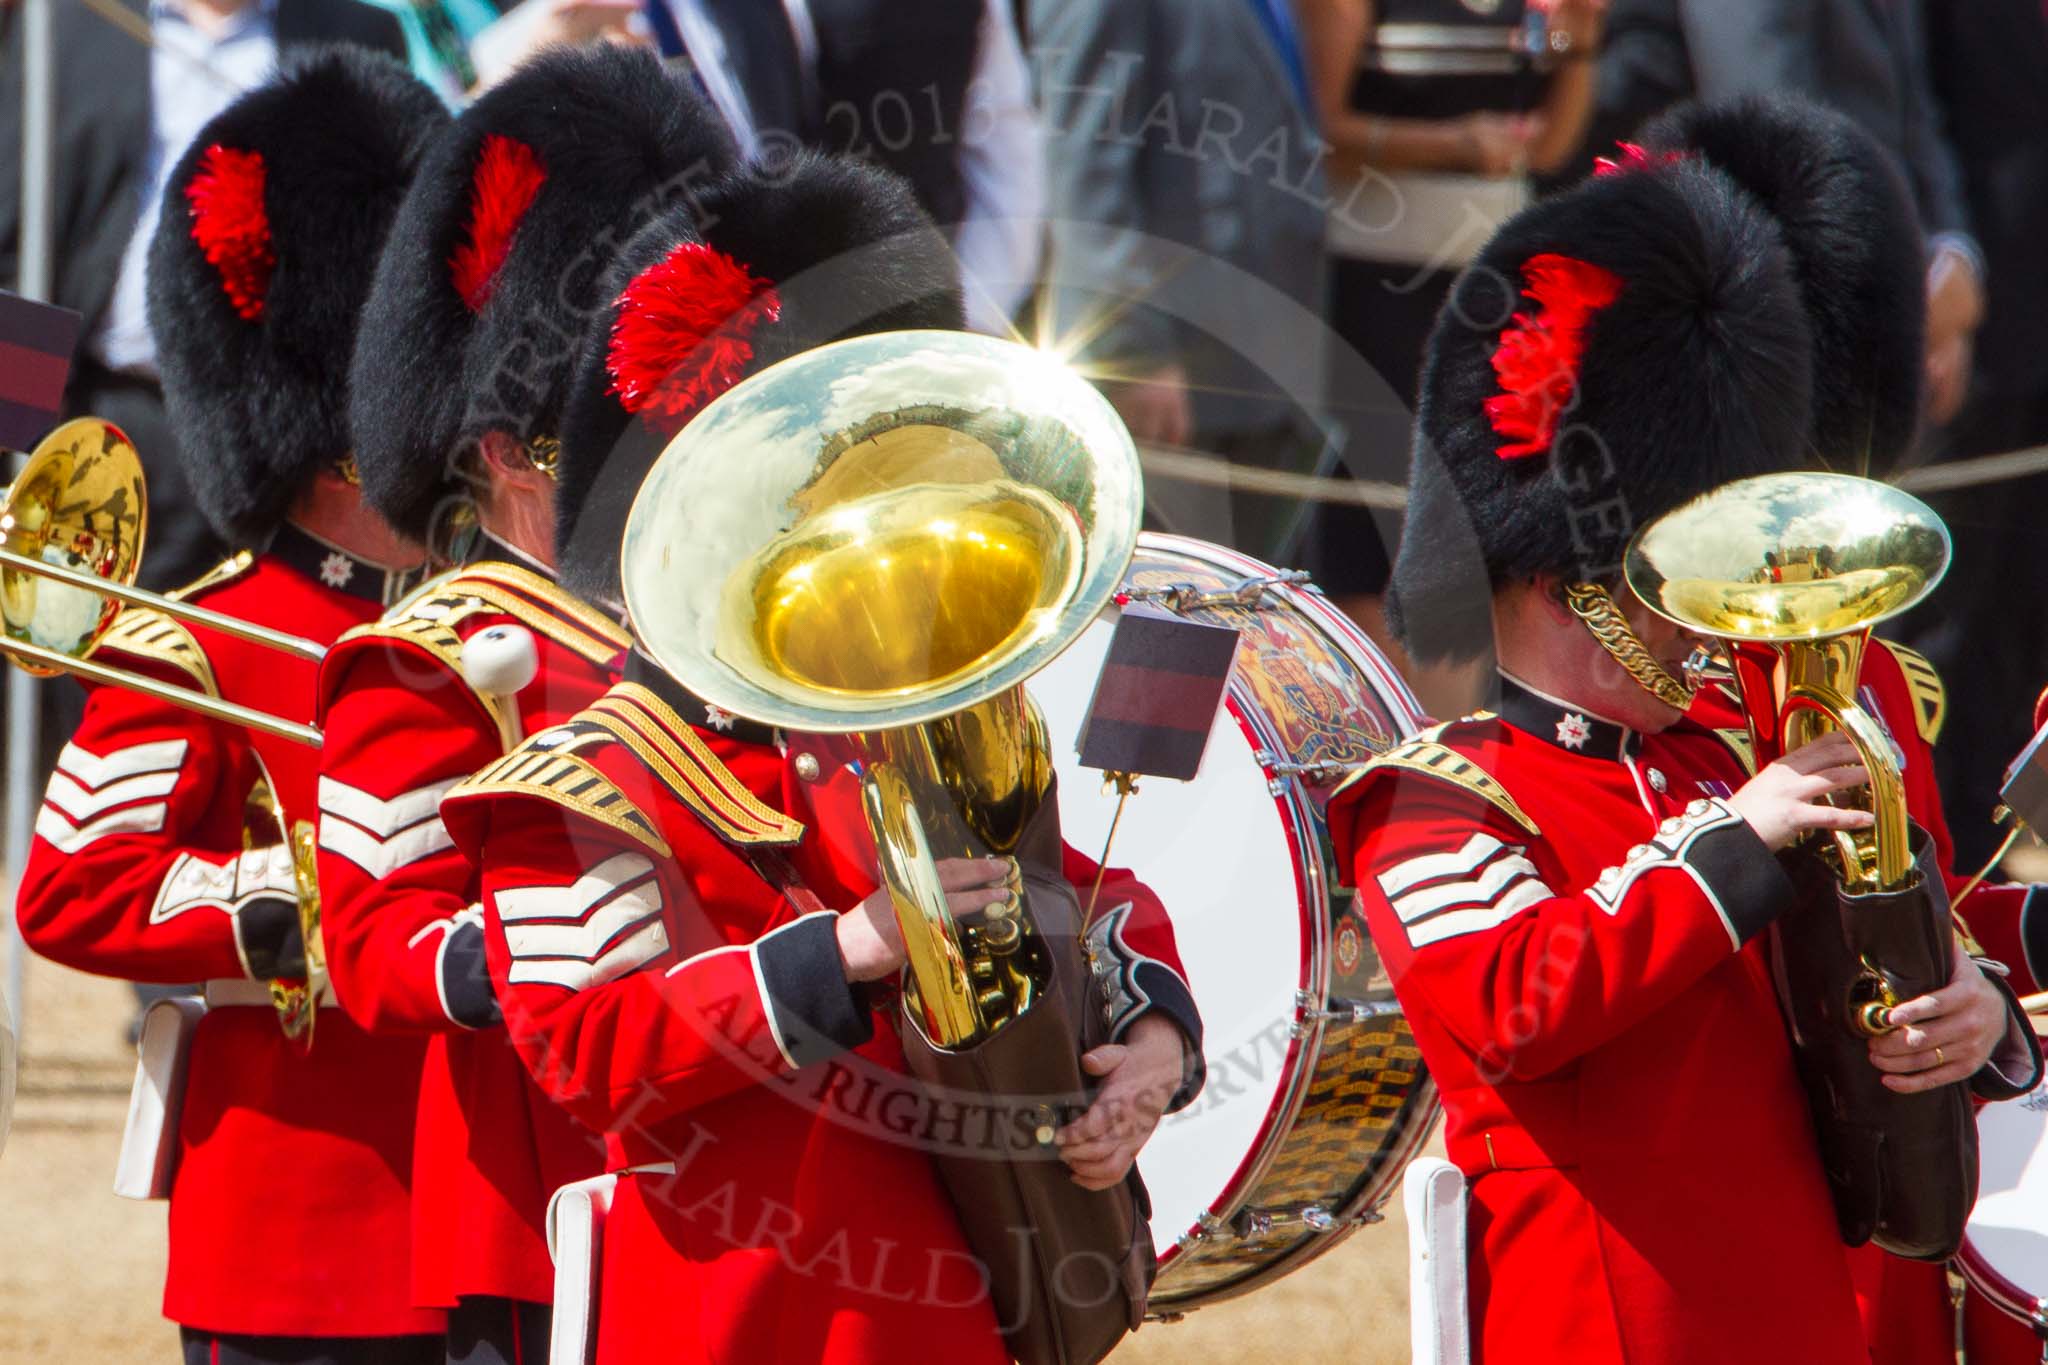 The Colonel's Review 2013: Musicians of the Band of the Coldstream Guards..
Horse Guards Parade, Westminster,
London SW1,

United Kingdom,
on 08 June 2013 at 10:15, image #56